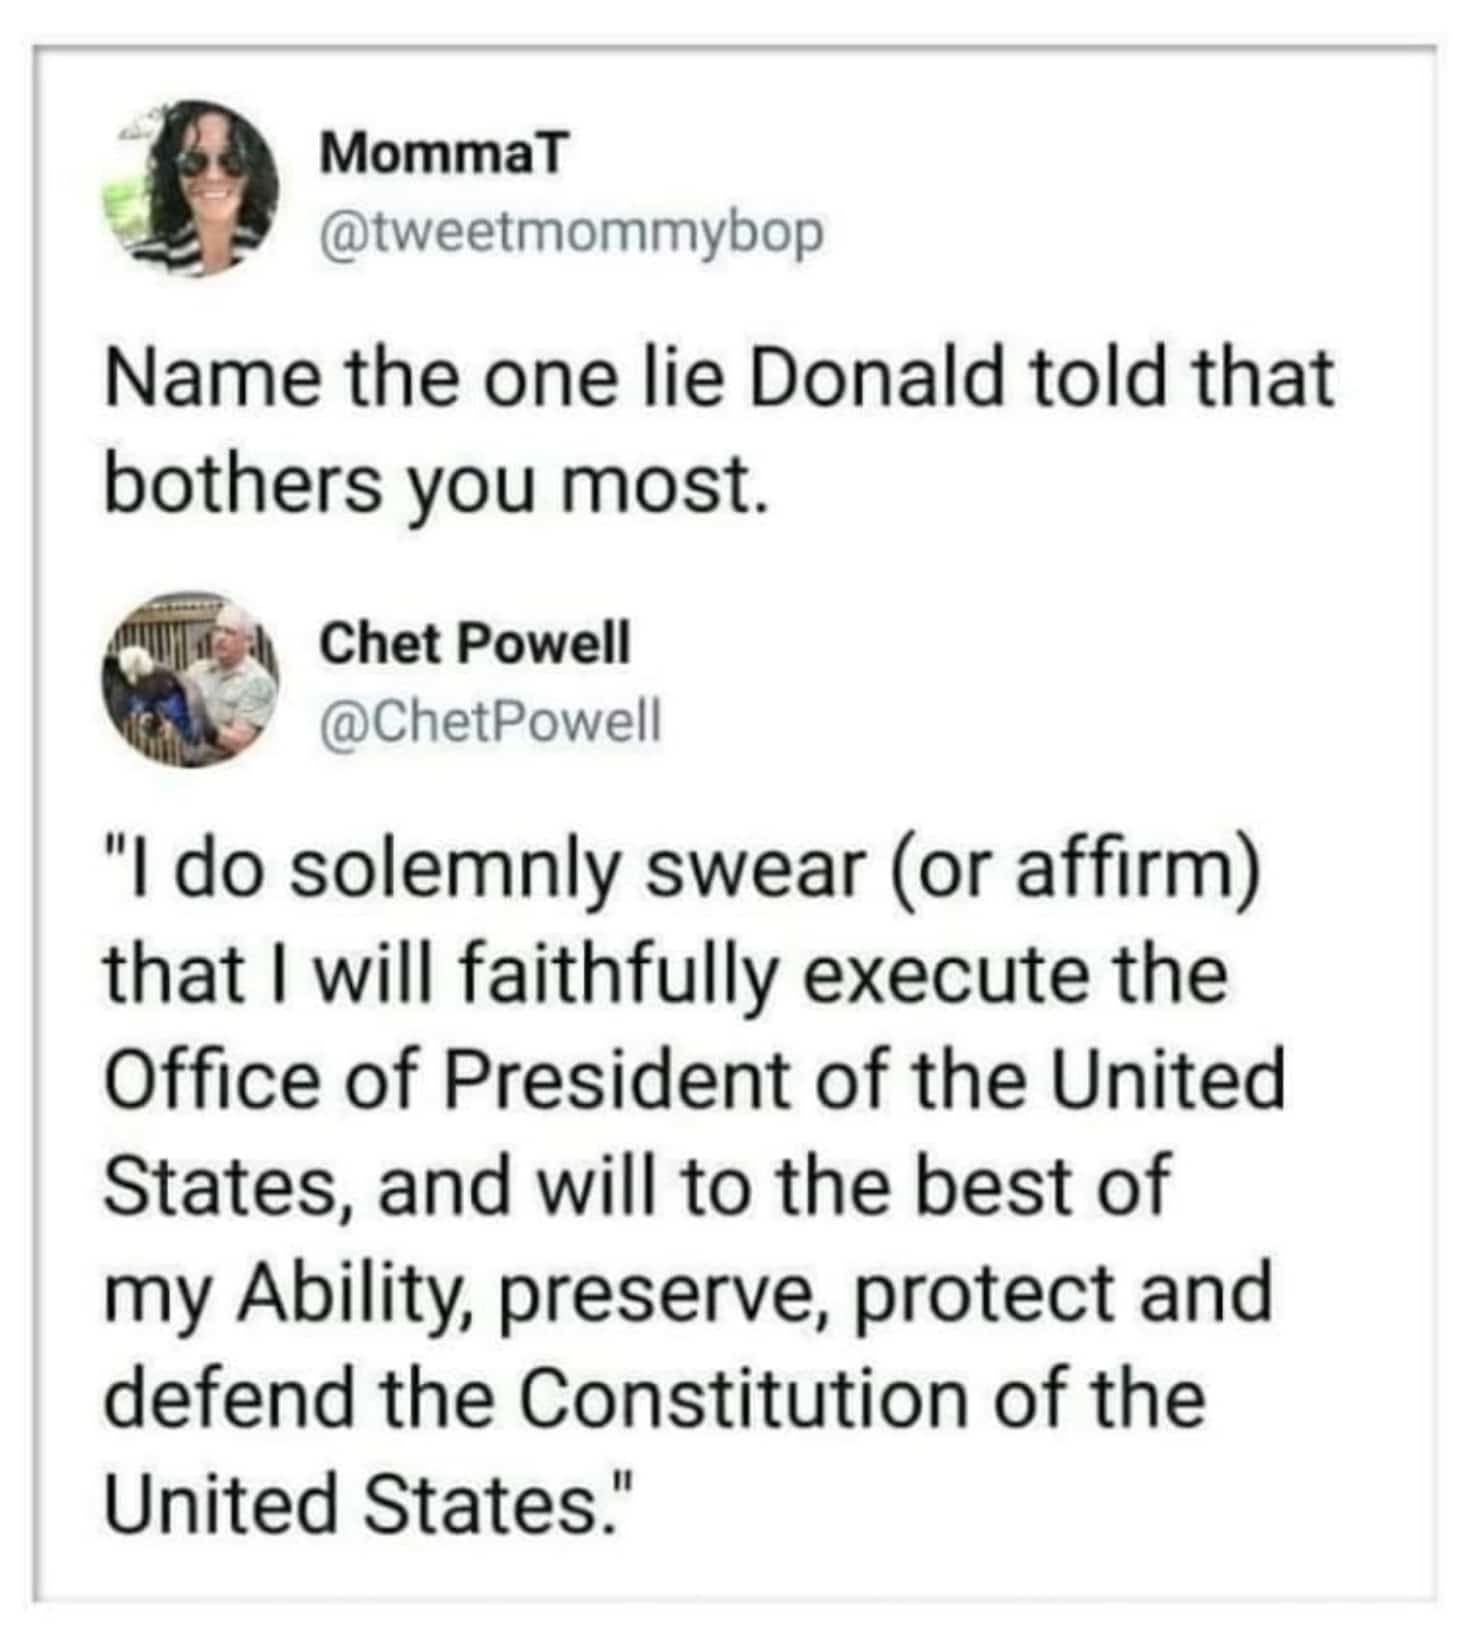 political political-memes political text: MommaT @tweetmommybop Name the one lie Donald told that bothers you most. Chet Powell @ChetPowell 